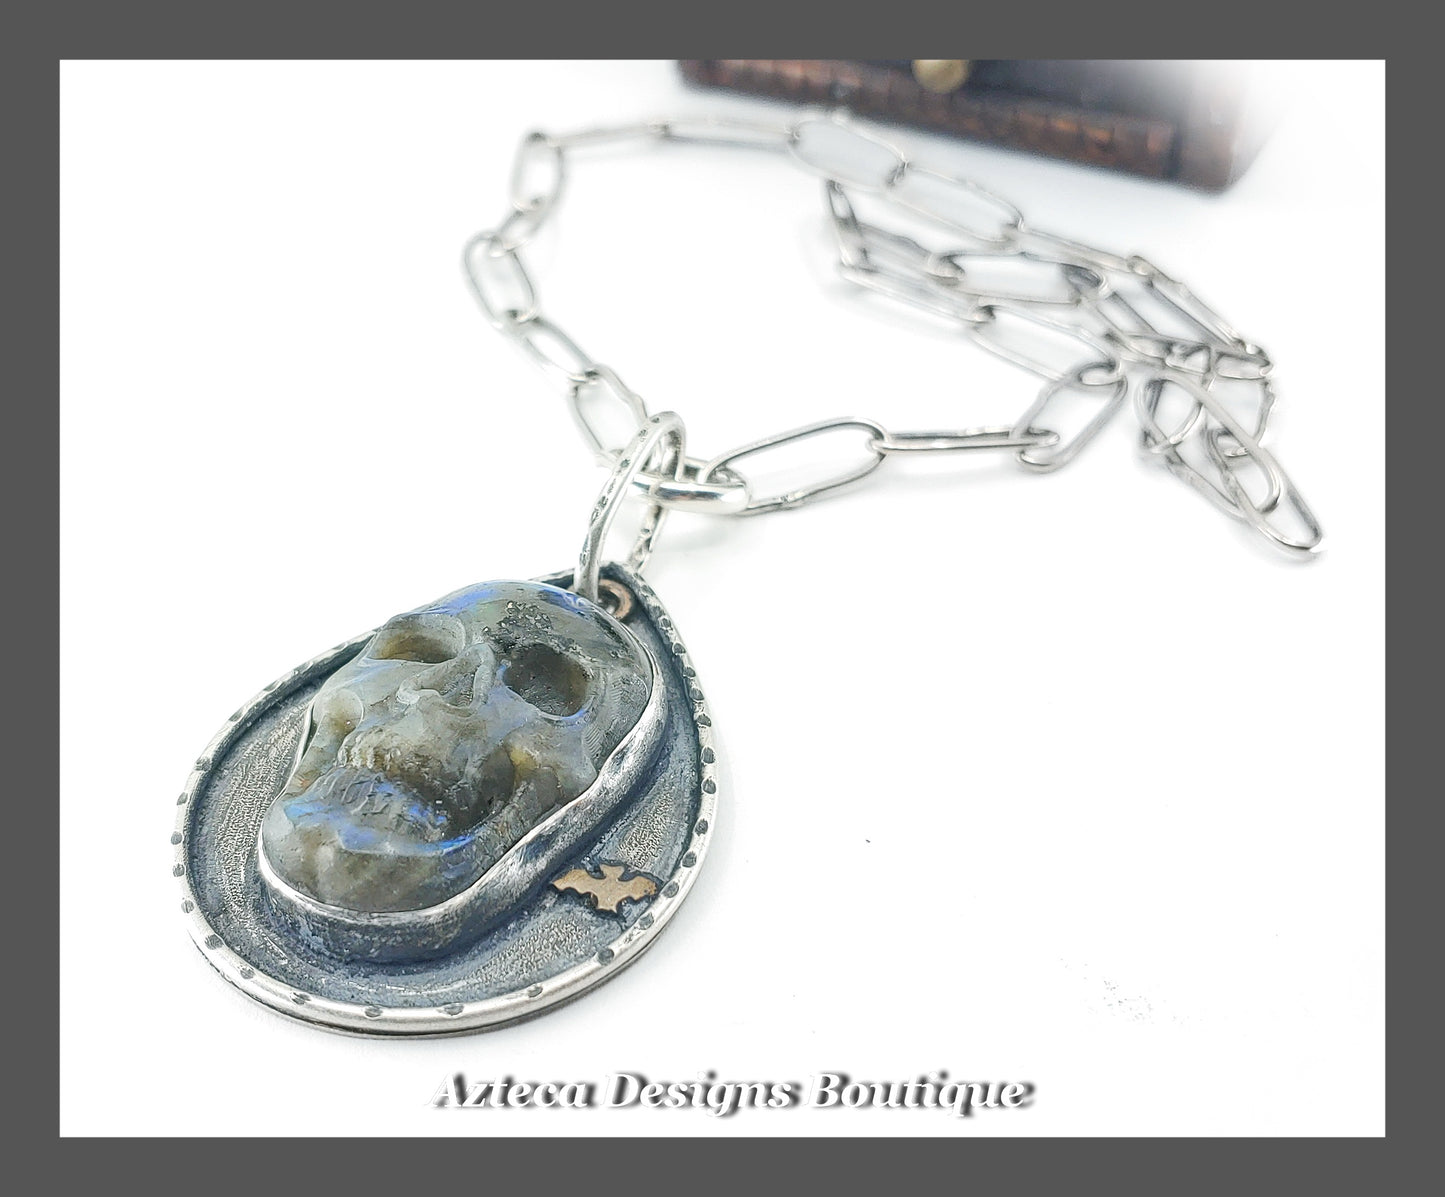 Carved Labradorite Skull Necklace + Hand Fabricated Argentium Silver